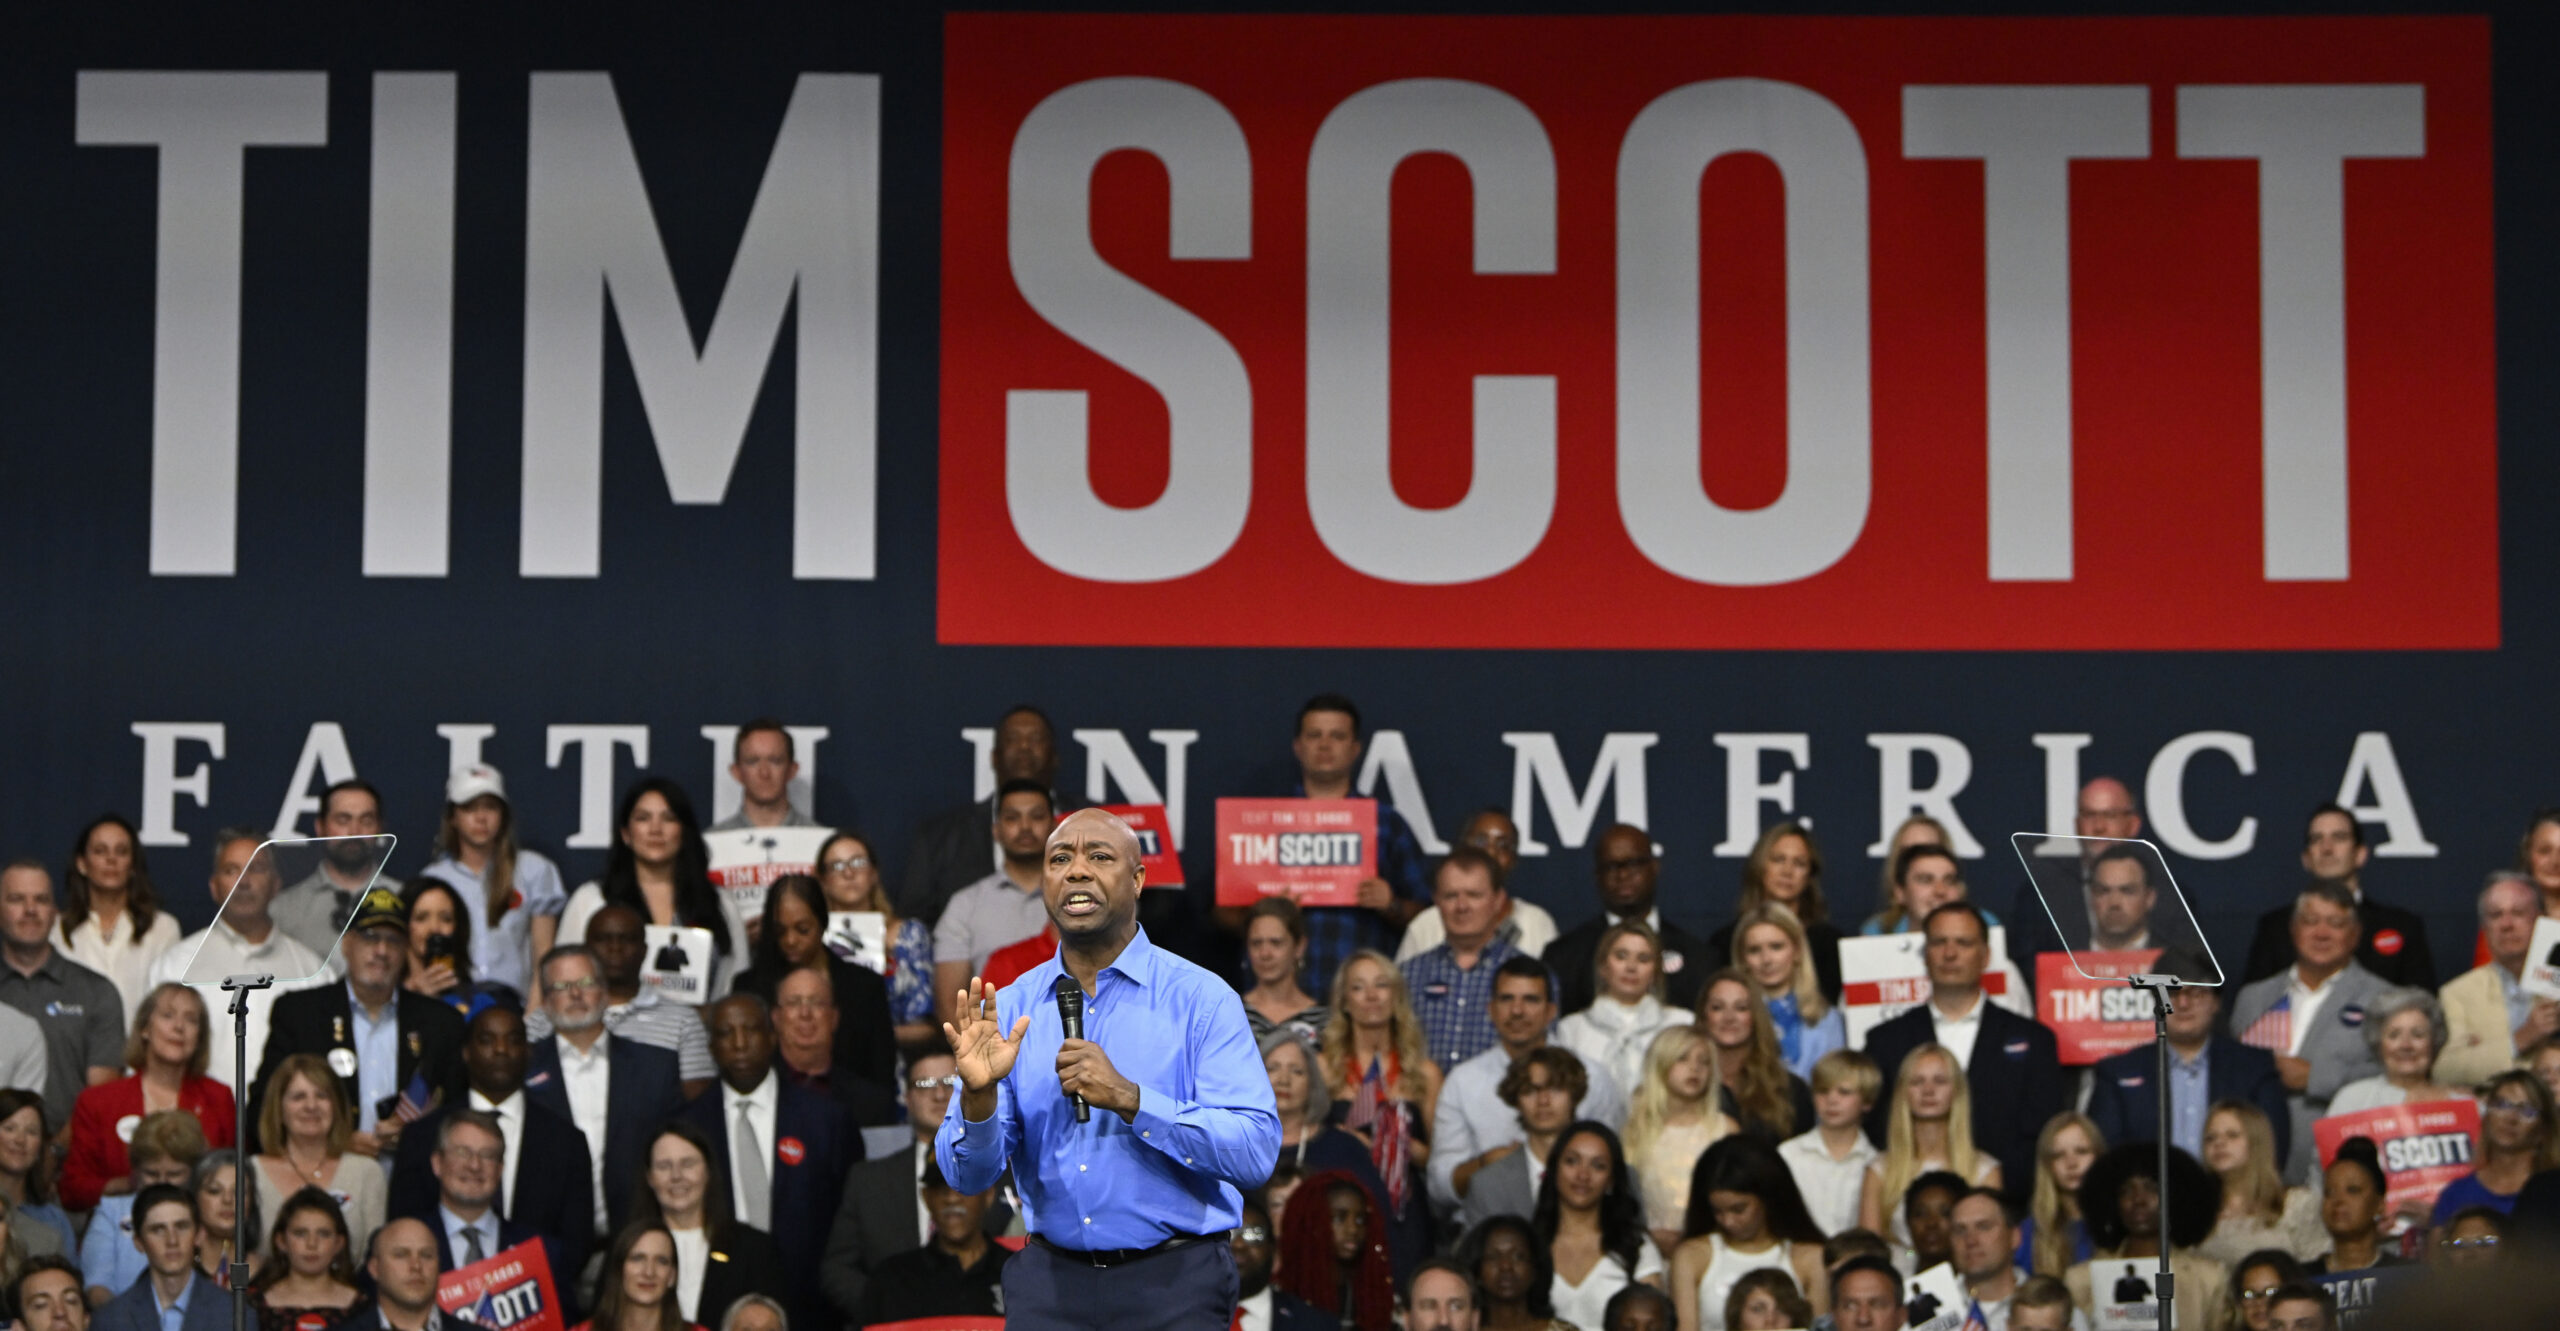 Why Do Leftists Get a Pass on Their Racism Toward Tim Scott, Other Black Republicans?